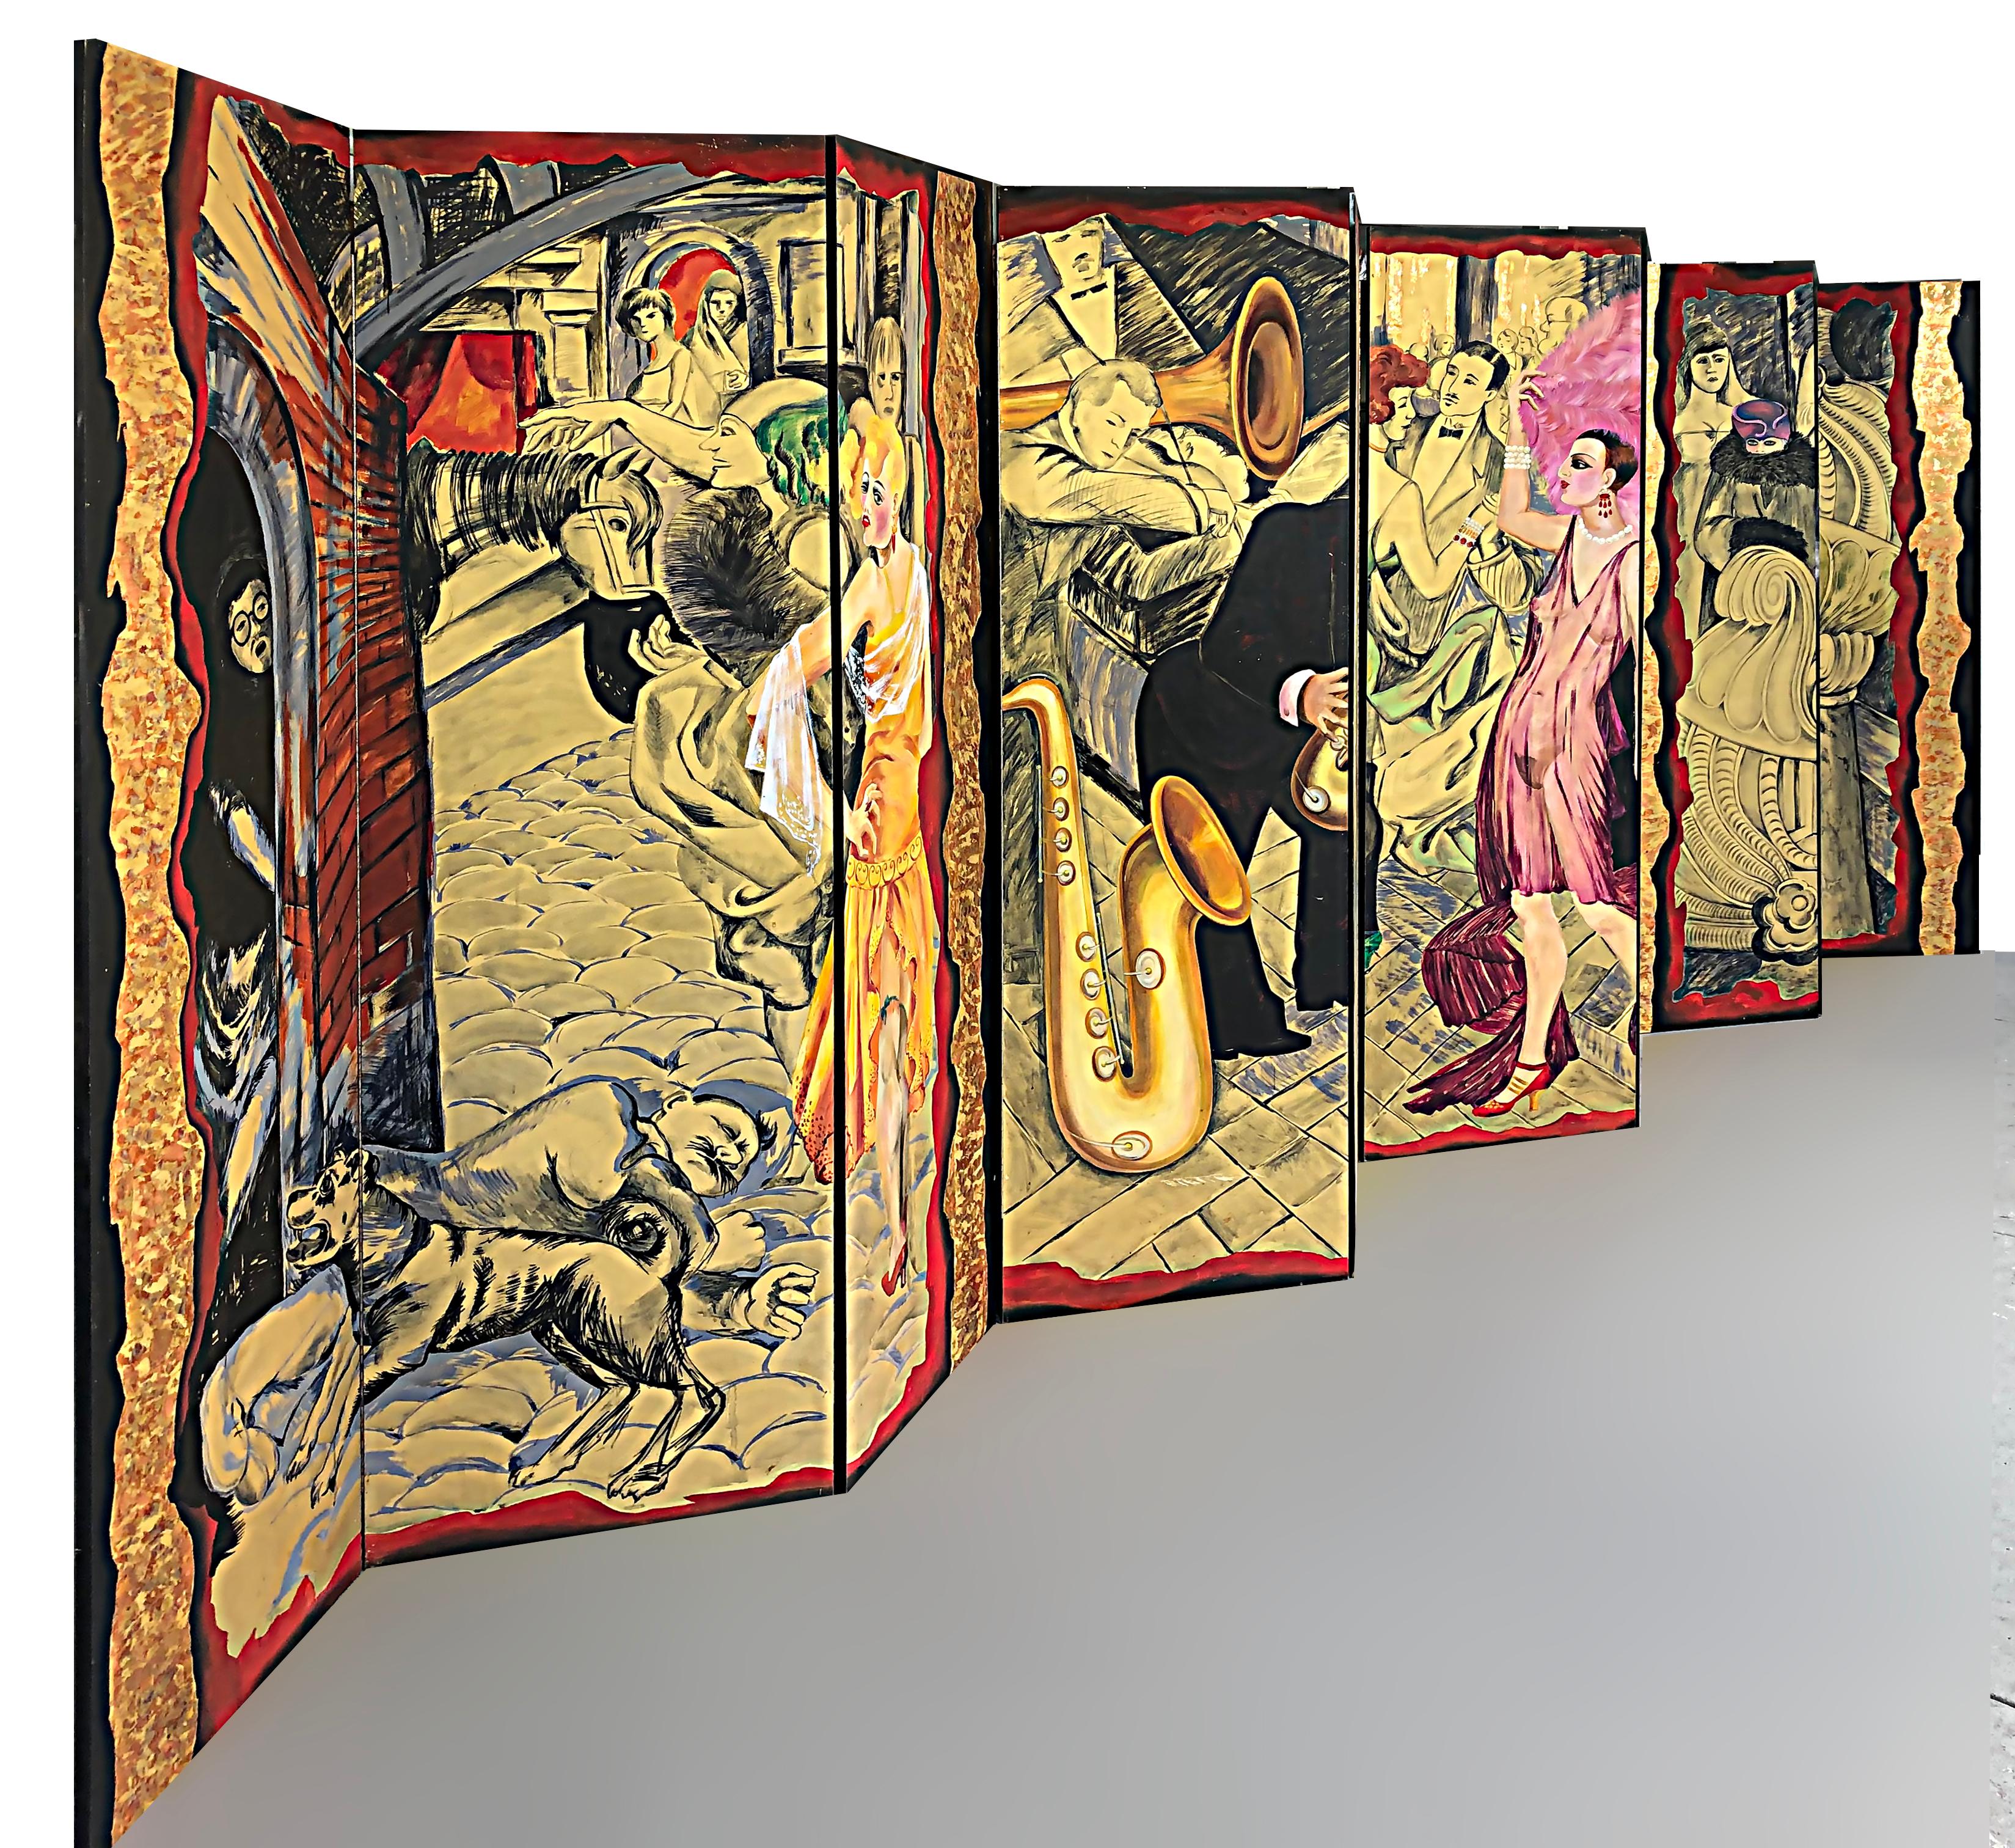 10 Panel hand-painted screen after Otto Dix's Painting Metropolis.

Offered for sale is a 10-panel hand-painted screen after Otto Dix's original painting 